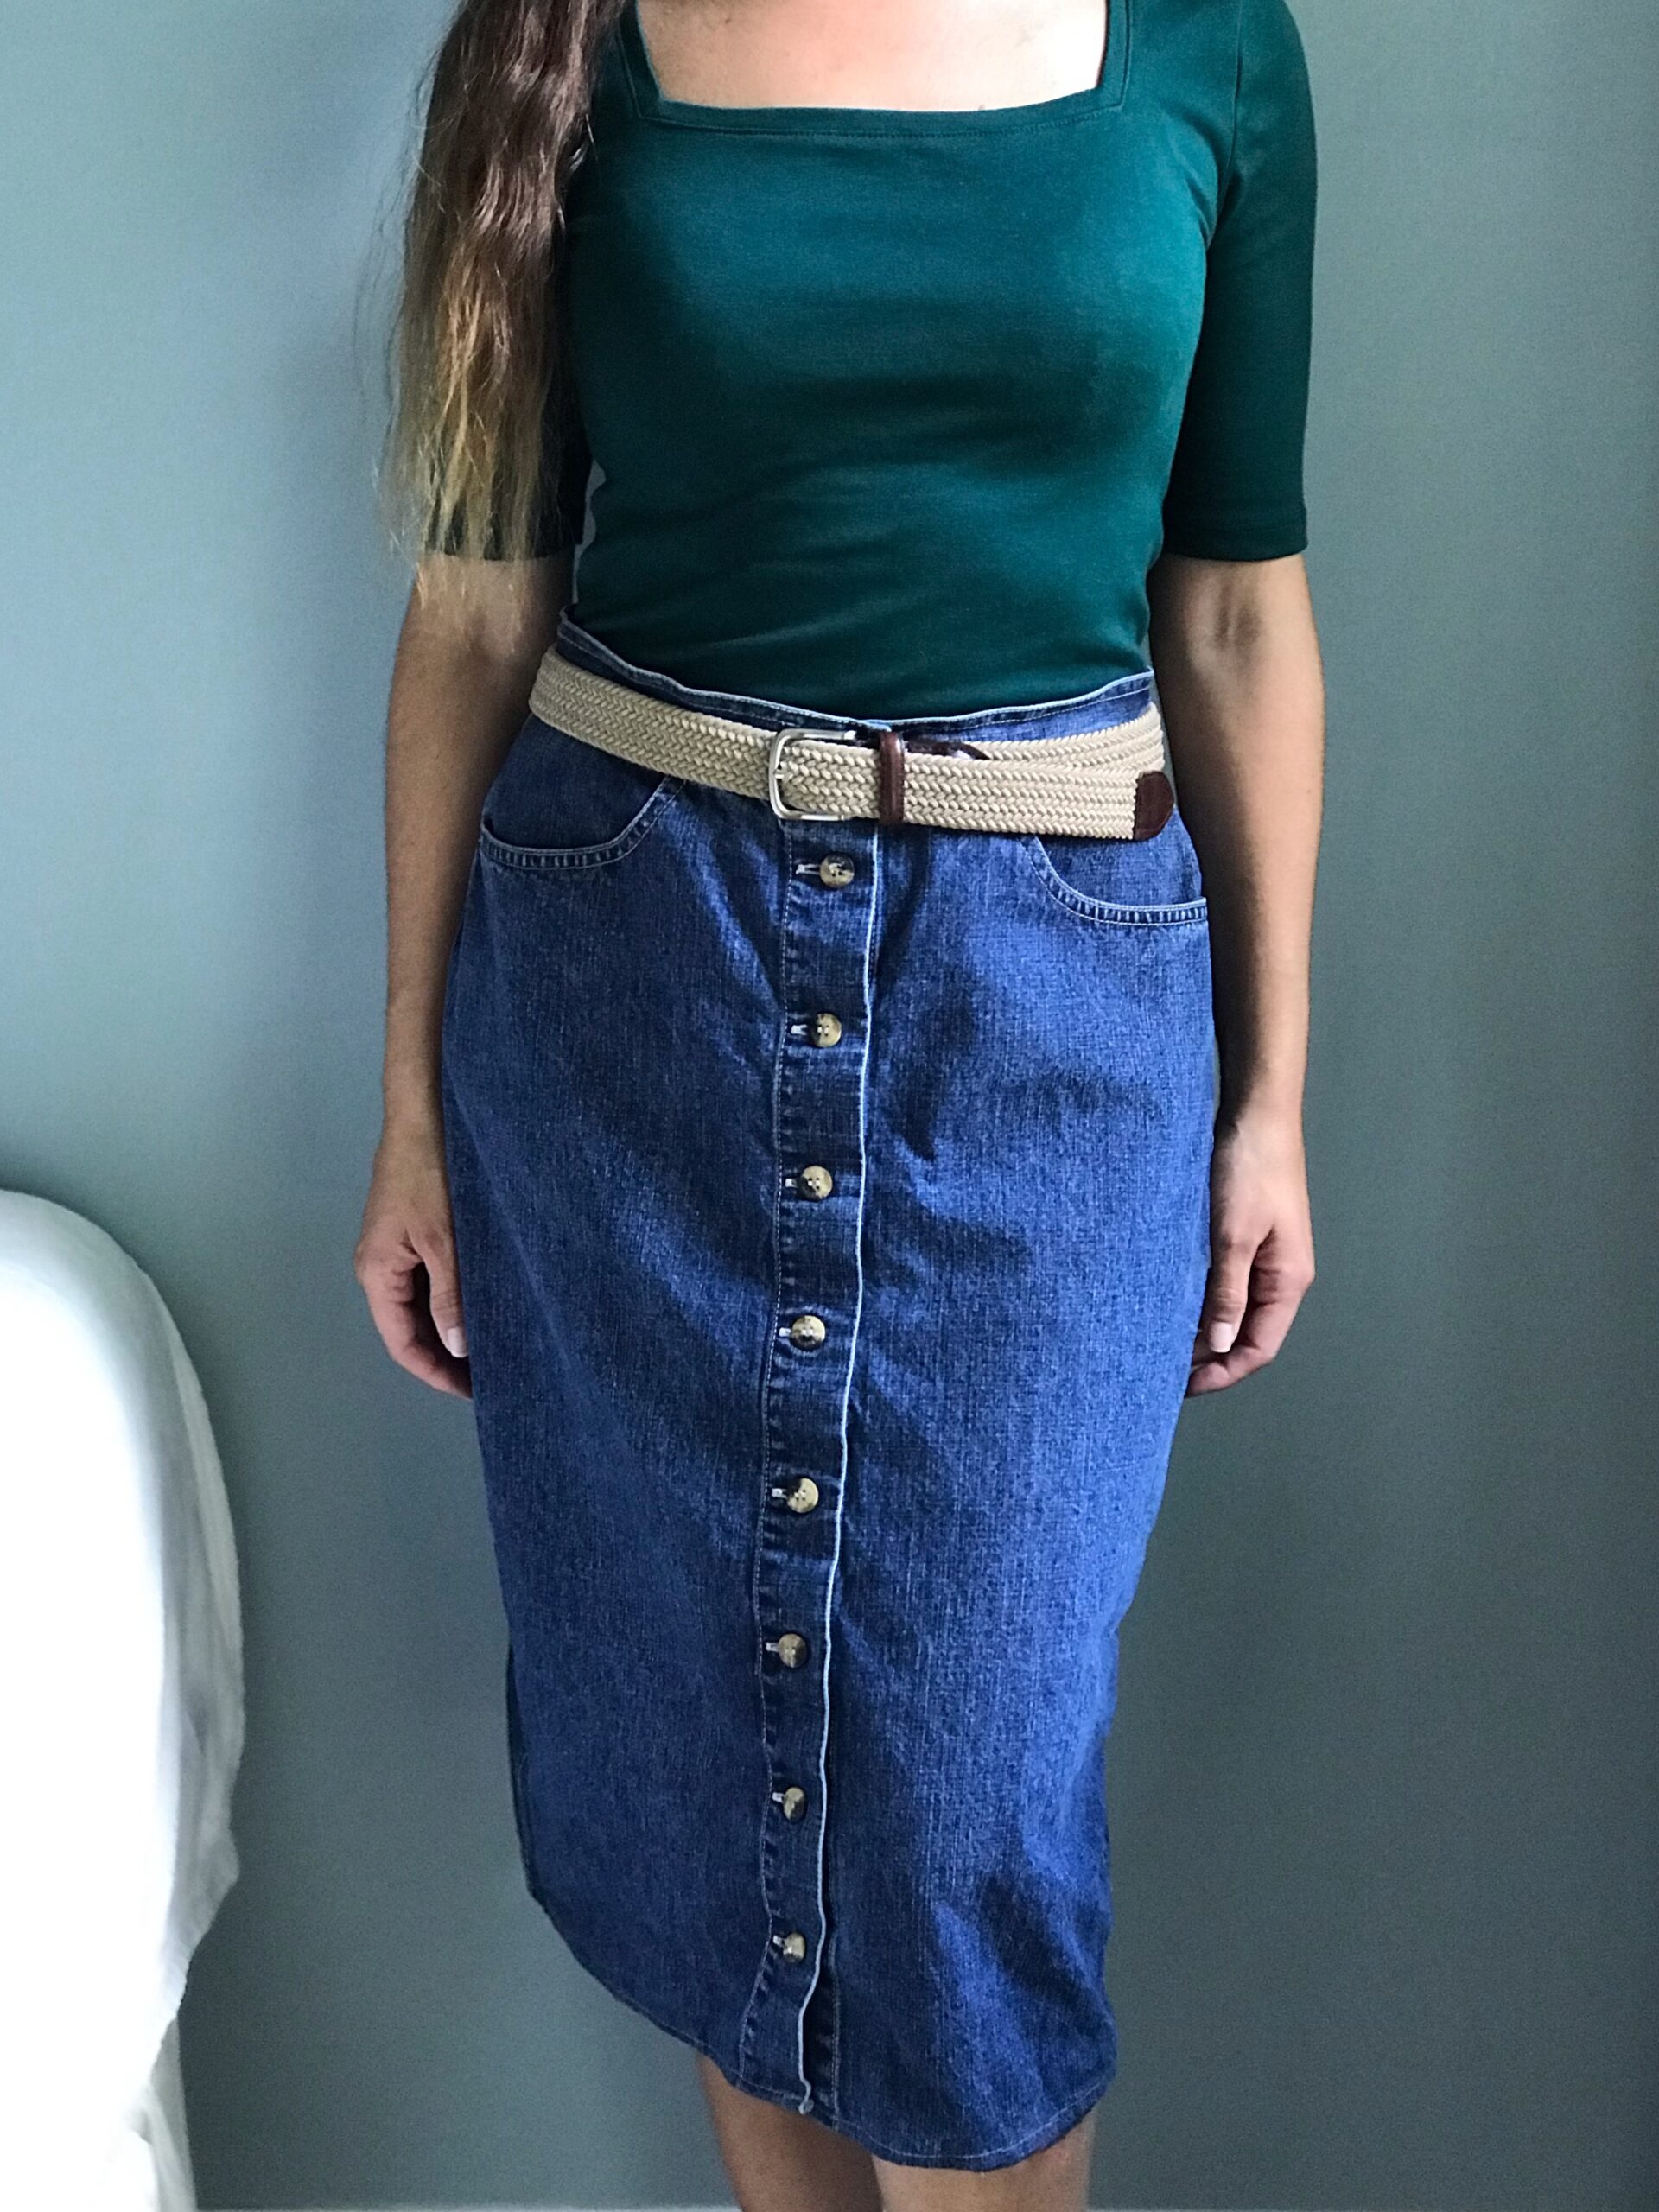 feminine fall outfit styling long denim skirt with square neck top